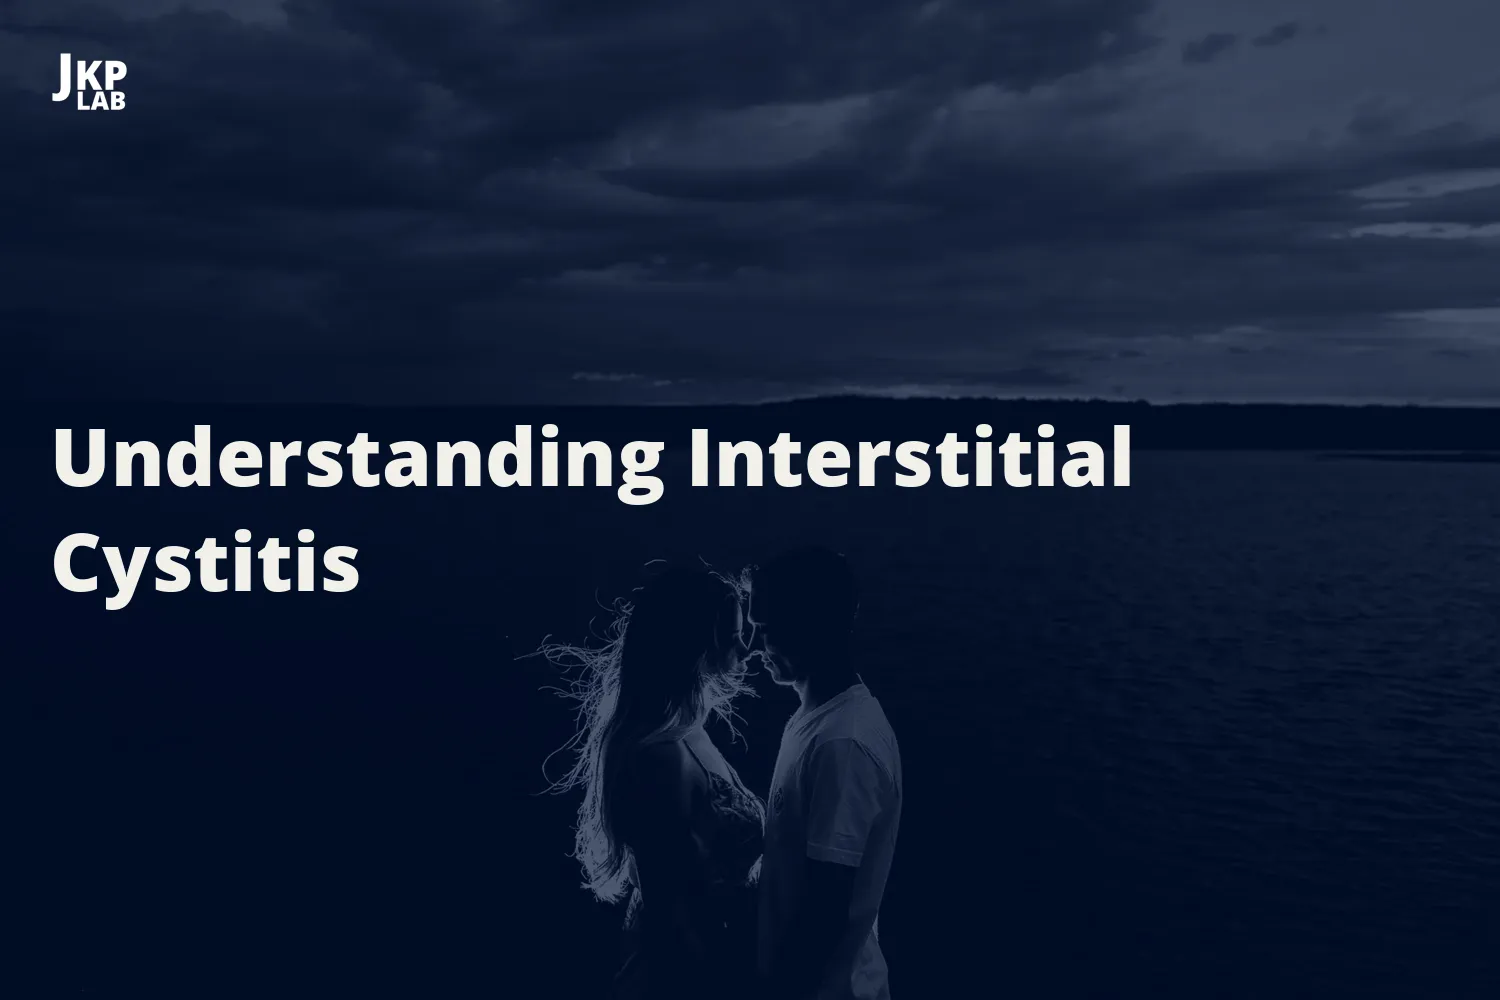 Interstitial Cystitis and Painful Sex